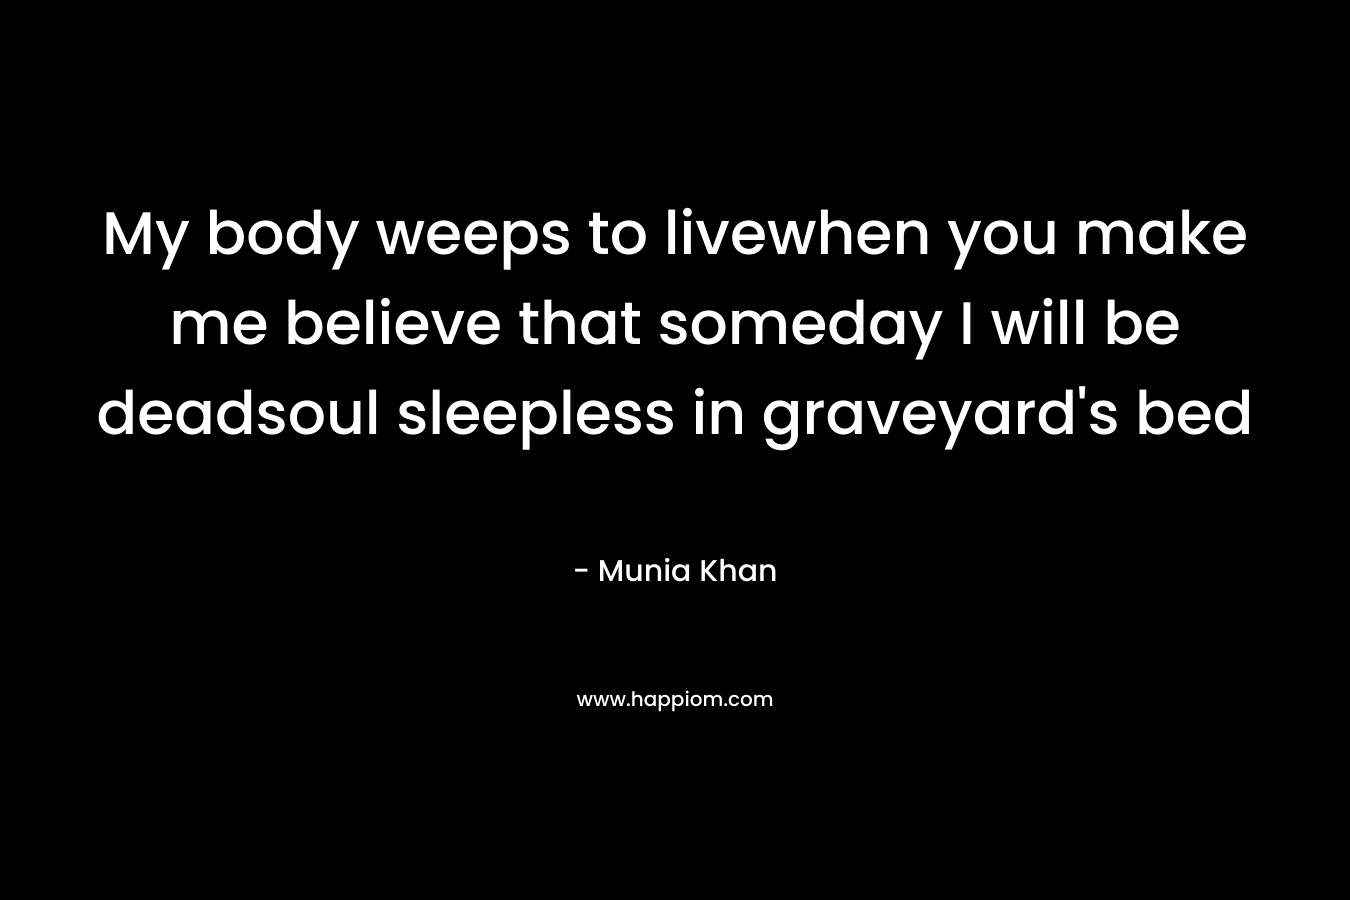 My body weeps to livewhen you make me believe that someday I will be deadsoul sleepless in graveyard’s bed – Munia Khan